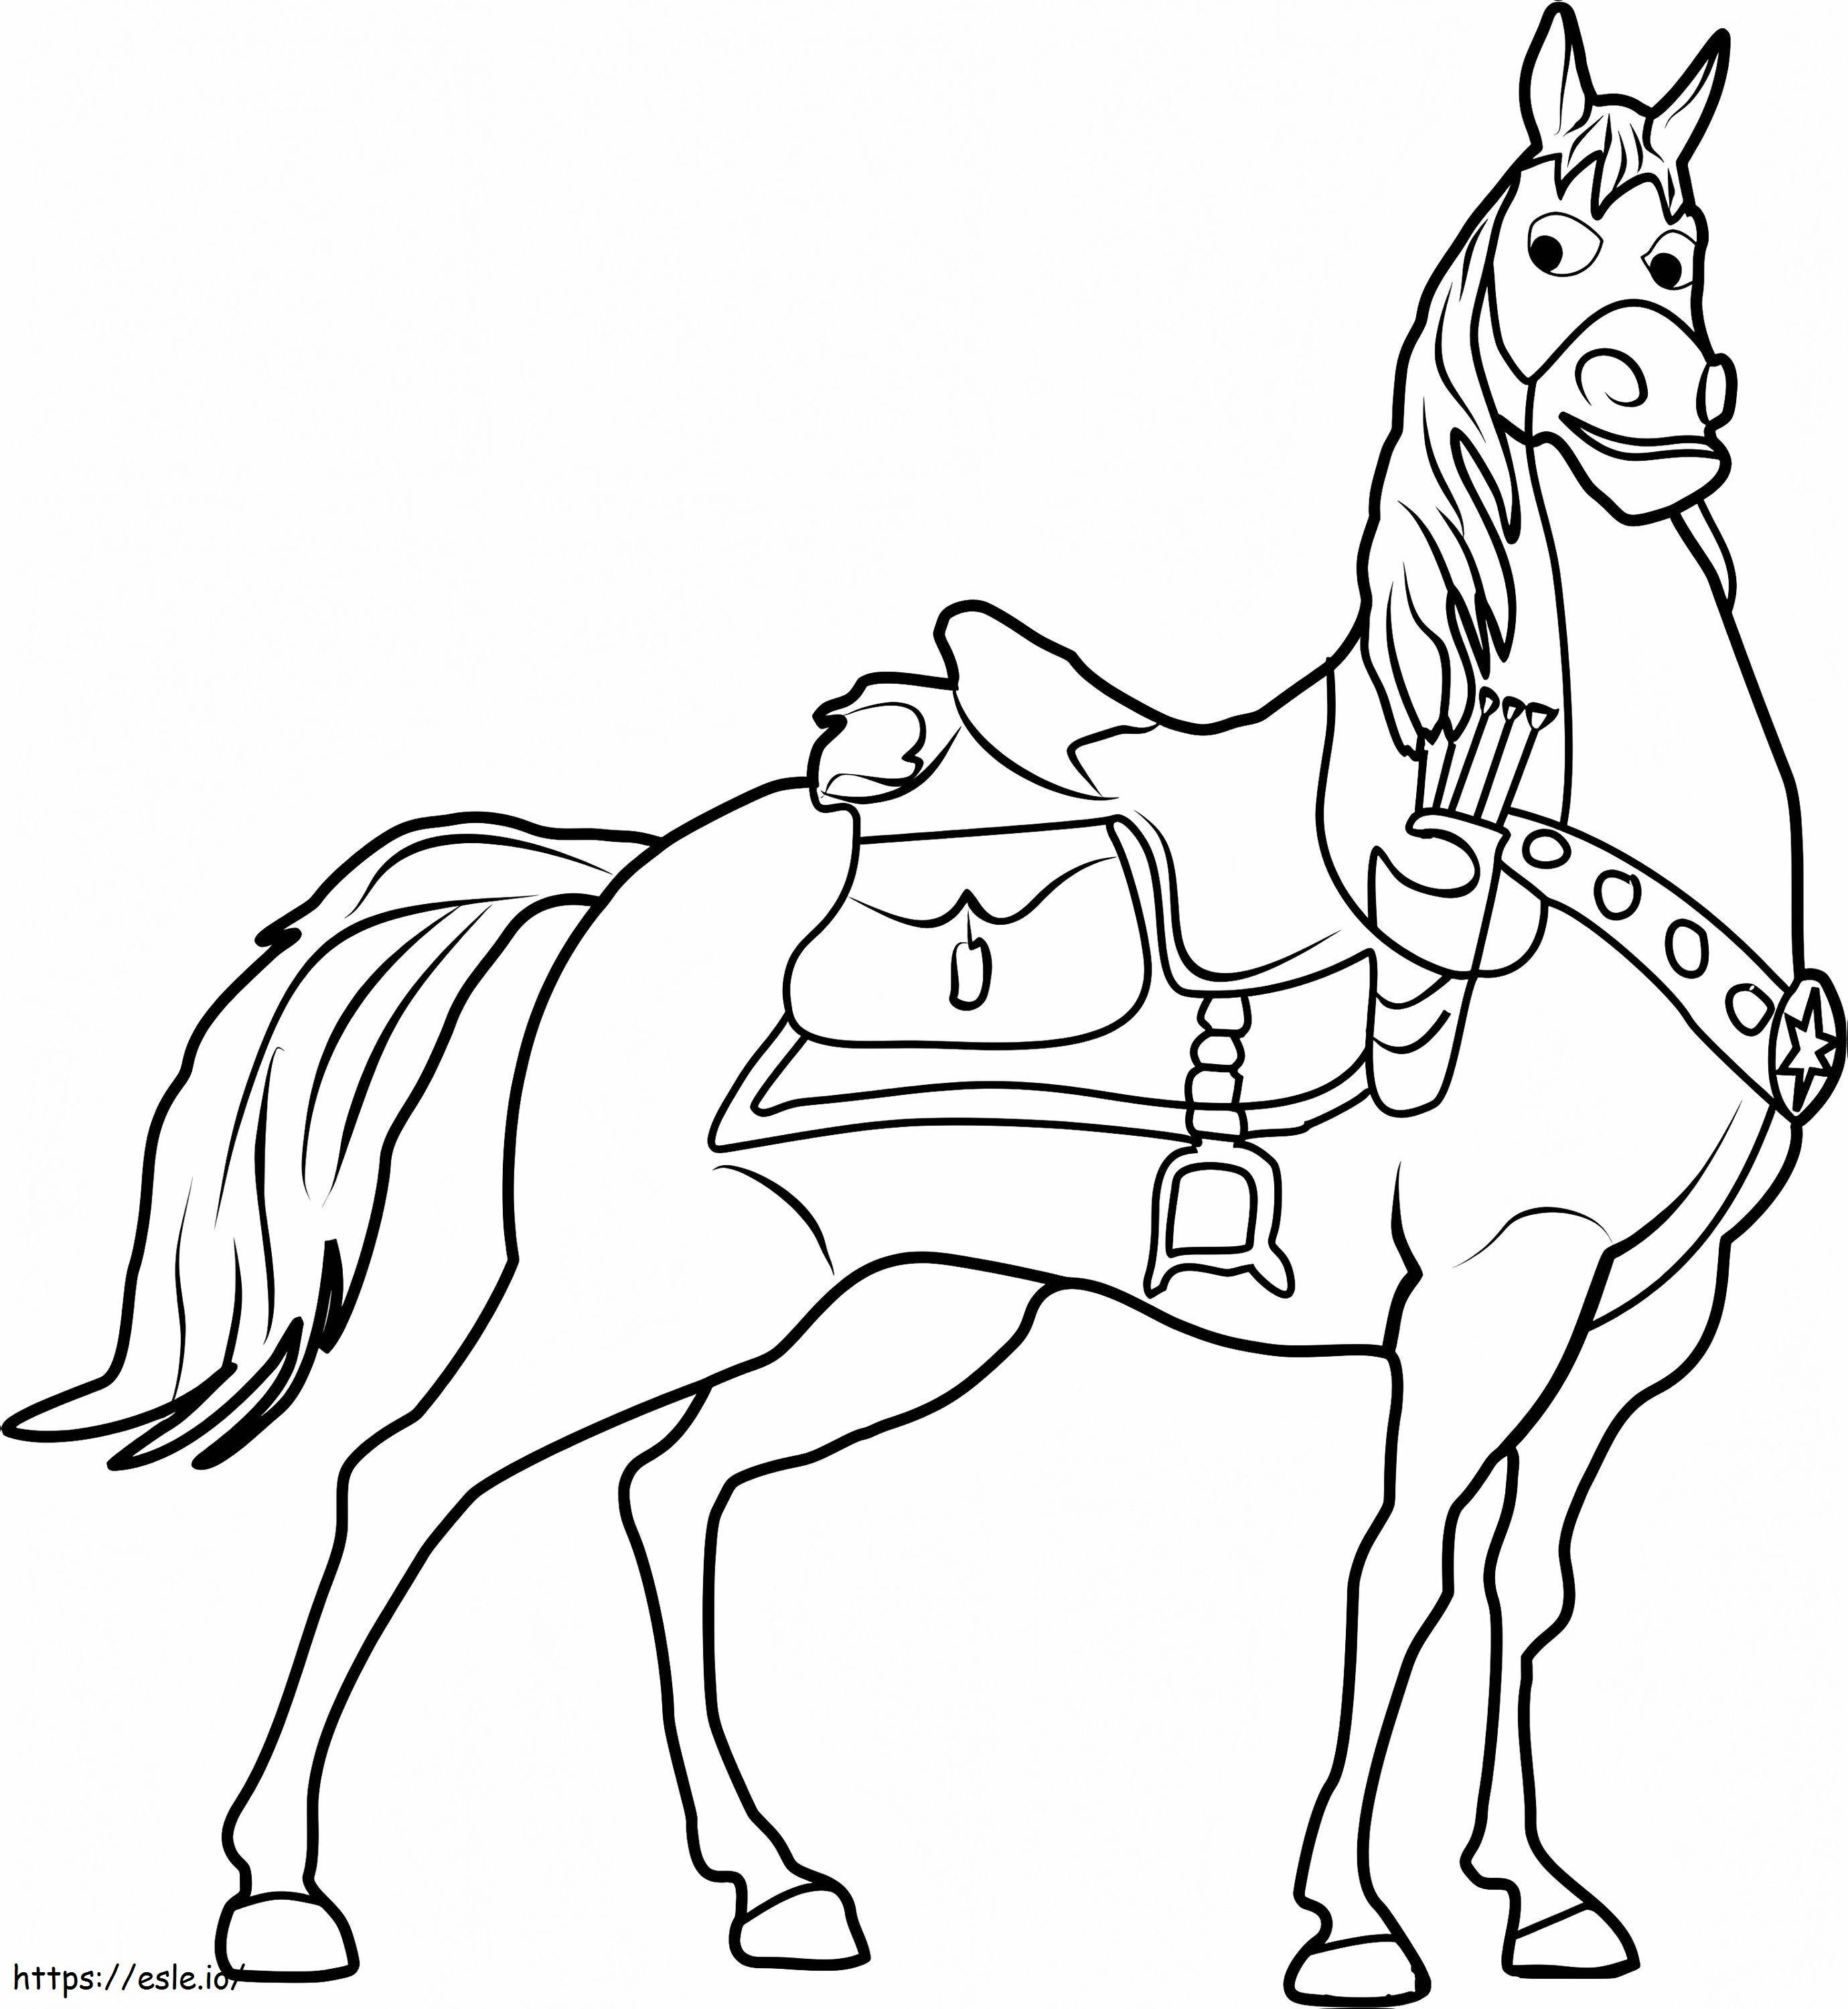 Cool Maximus A4 coloring page